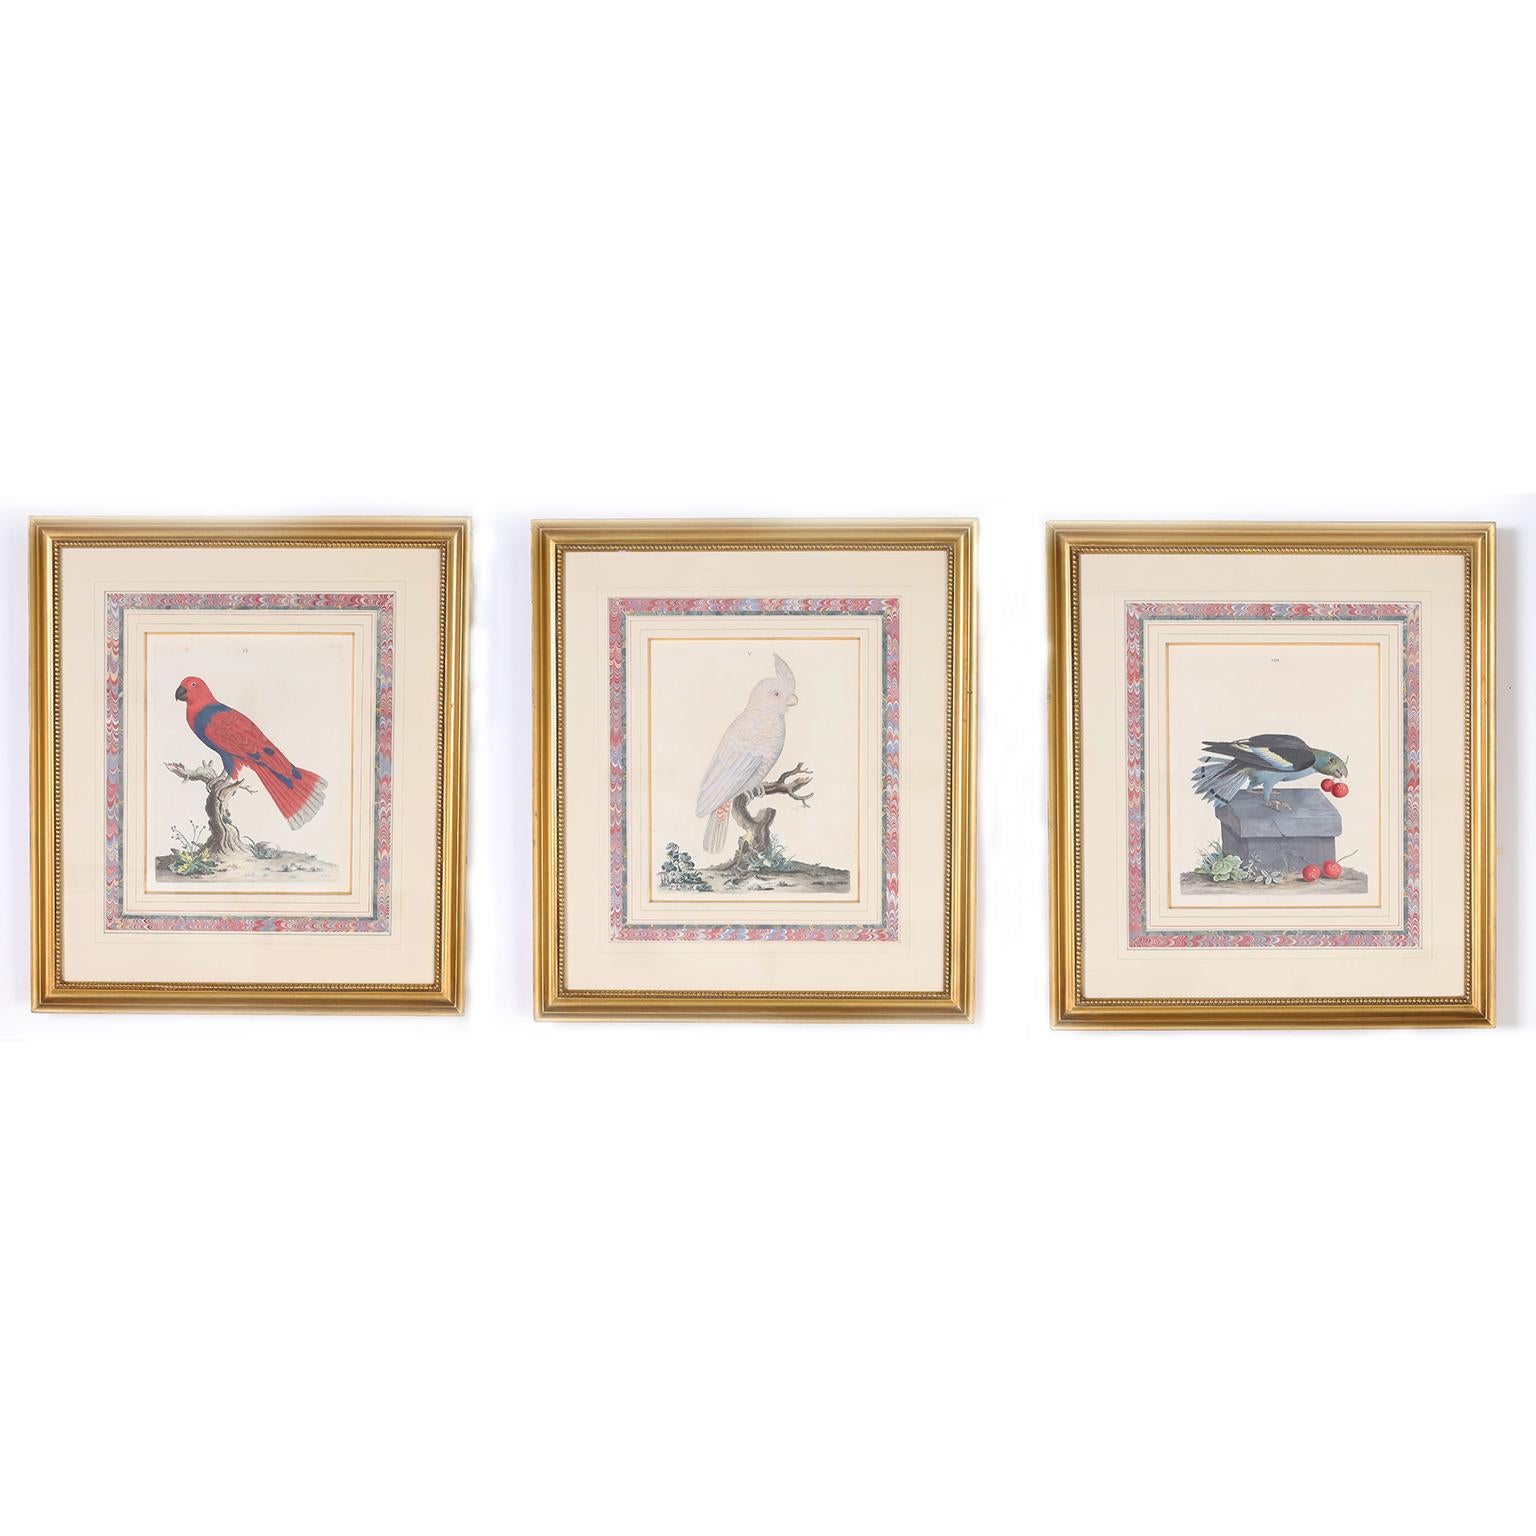 Peter Brown Animal Print - Three Antique Hand Colored Engravings of Birds